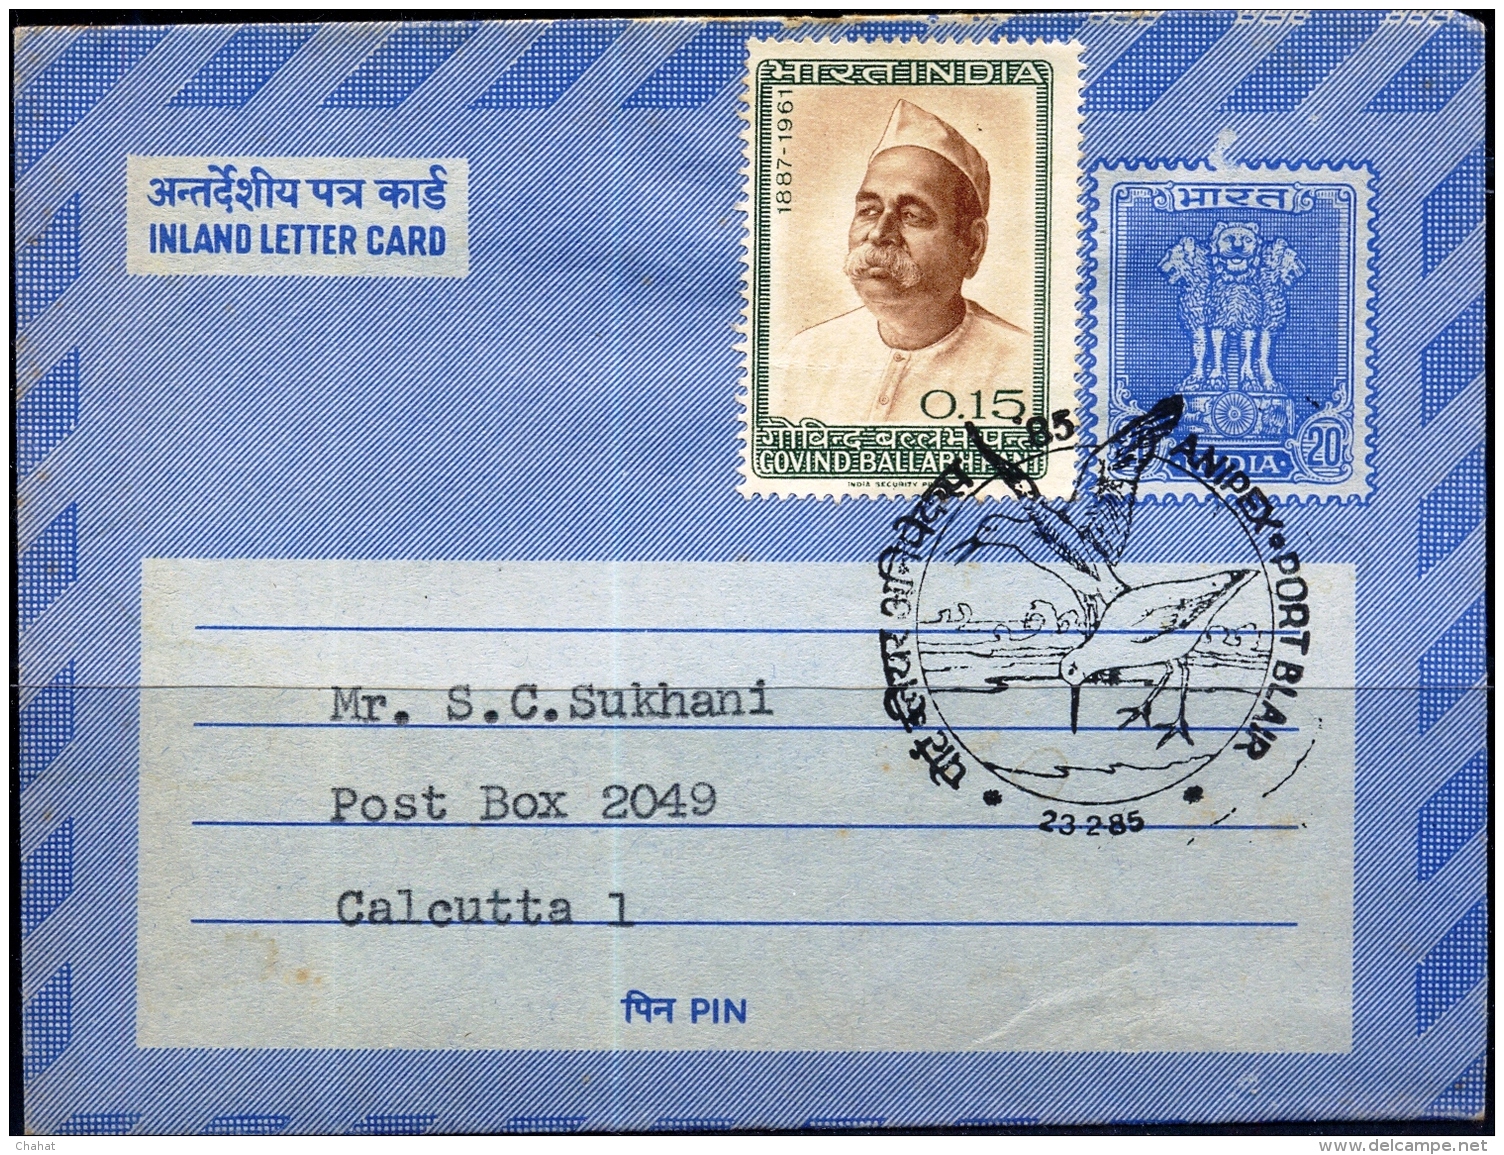 MIGRATORY BIRDS -PORT BLAIR ISLANDS-PICTORIAL CANCELLATION ON INLAND LETTER CARD-INDIA-19685-BX1-372 - Oblitérations & Flammes